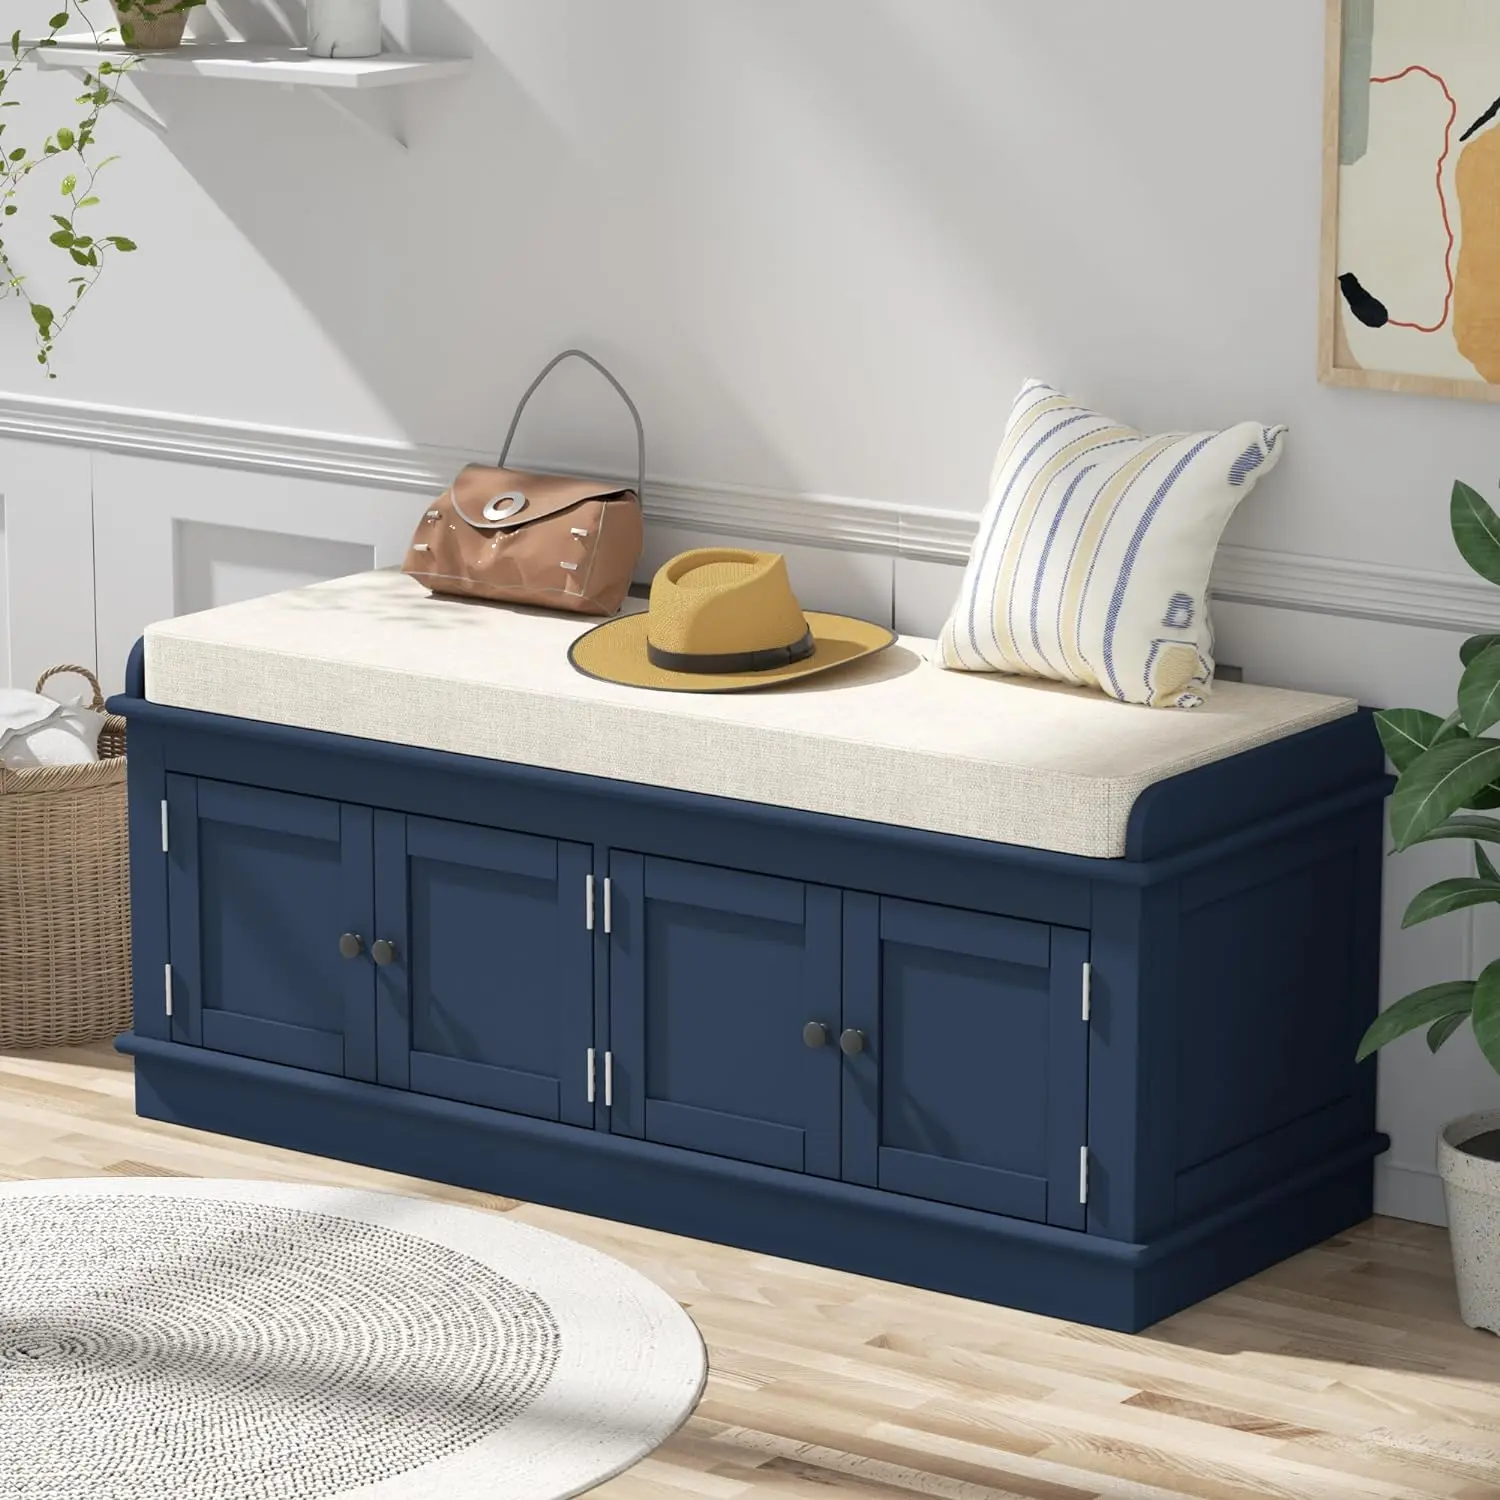 

Storage Bench with Seating&Removable Cushion,42.7" Shoe Rack Entryway w/4 Doors and Adjustable Shelves for Bedroom